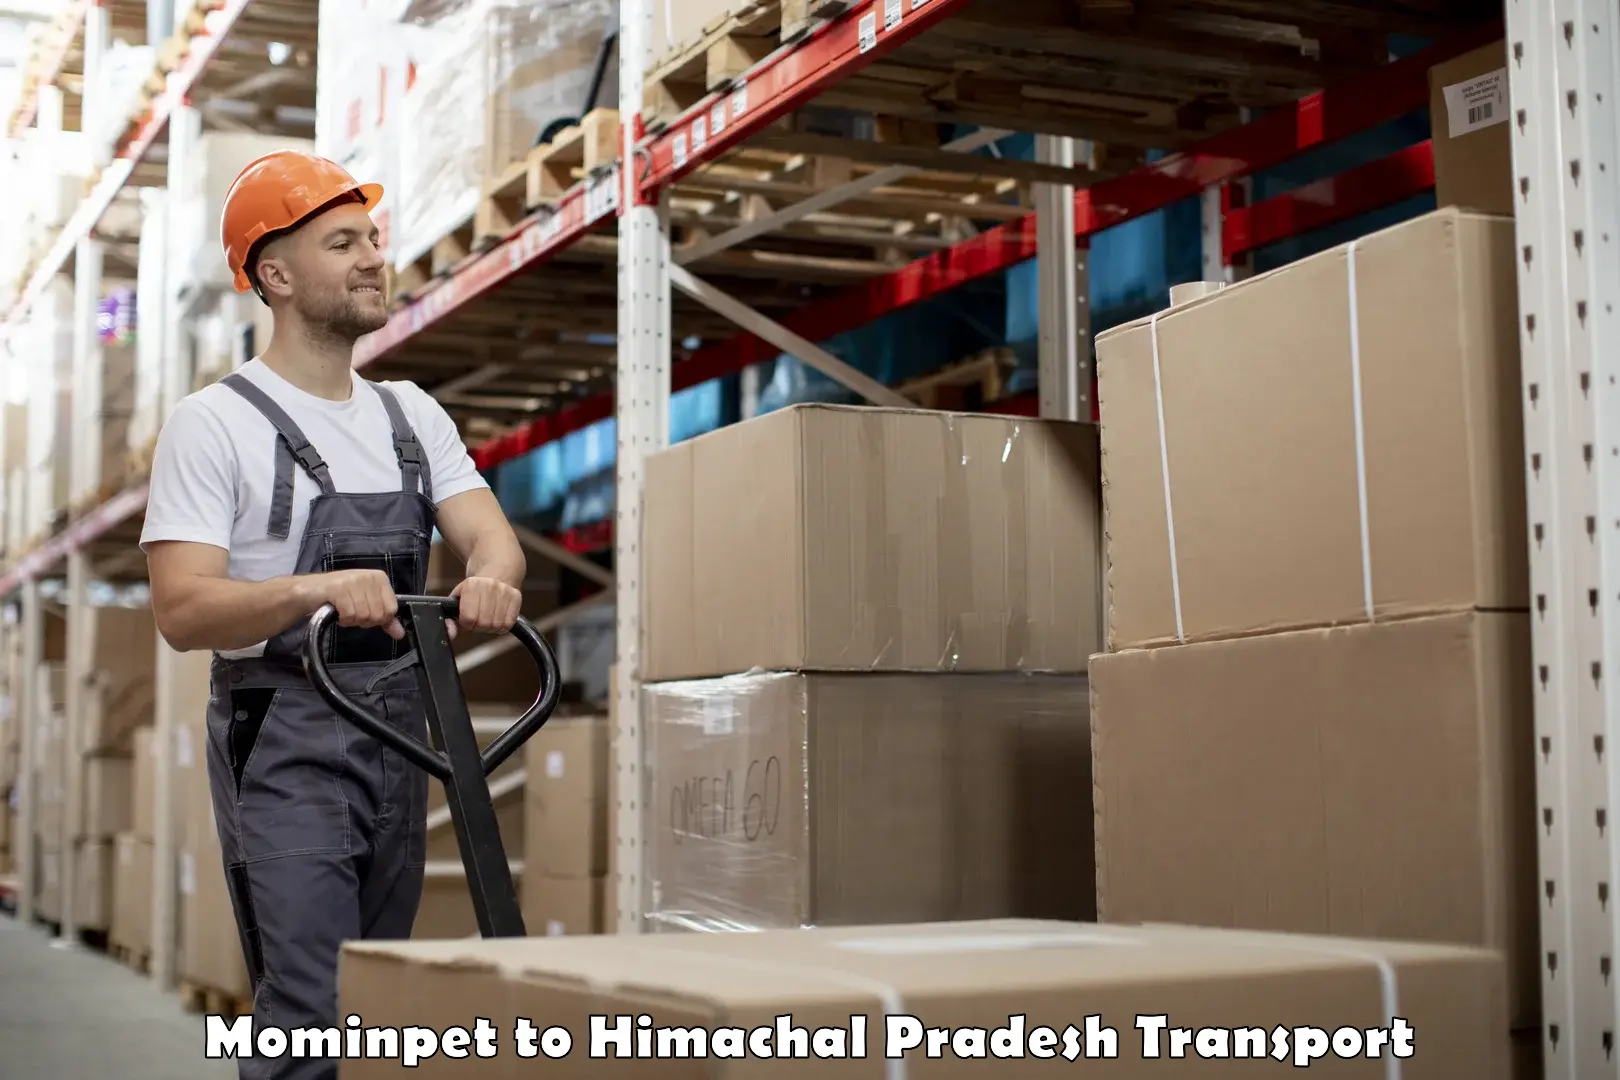 Commercial transport service Mominpet to Baijnath